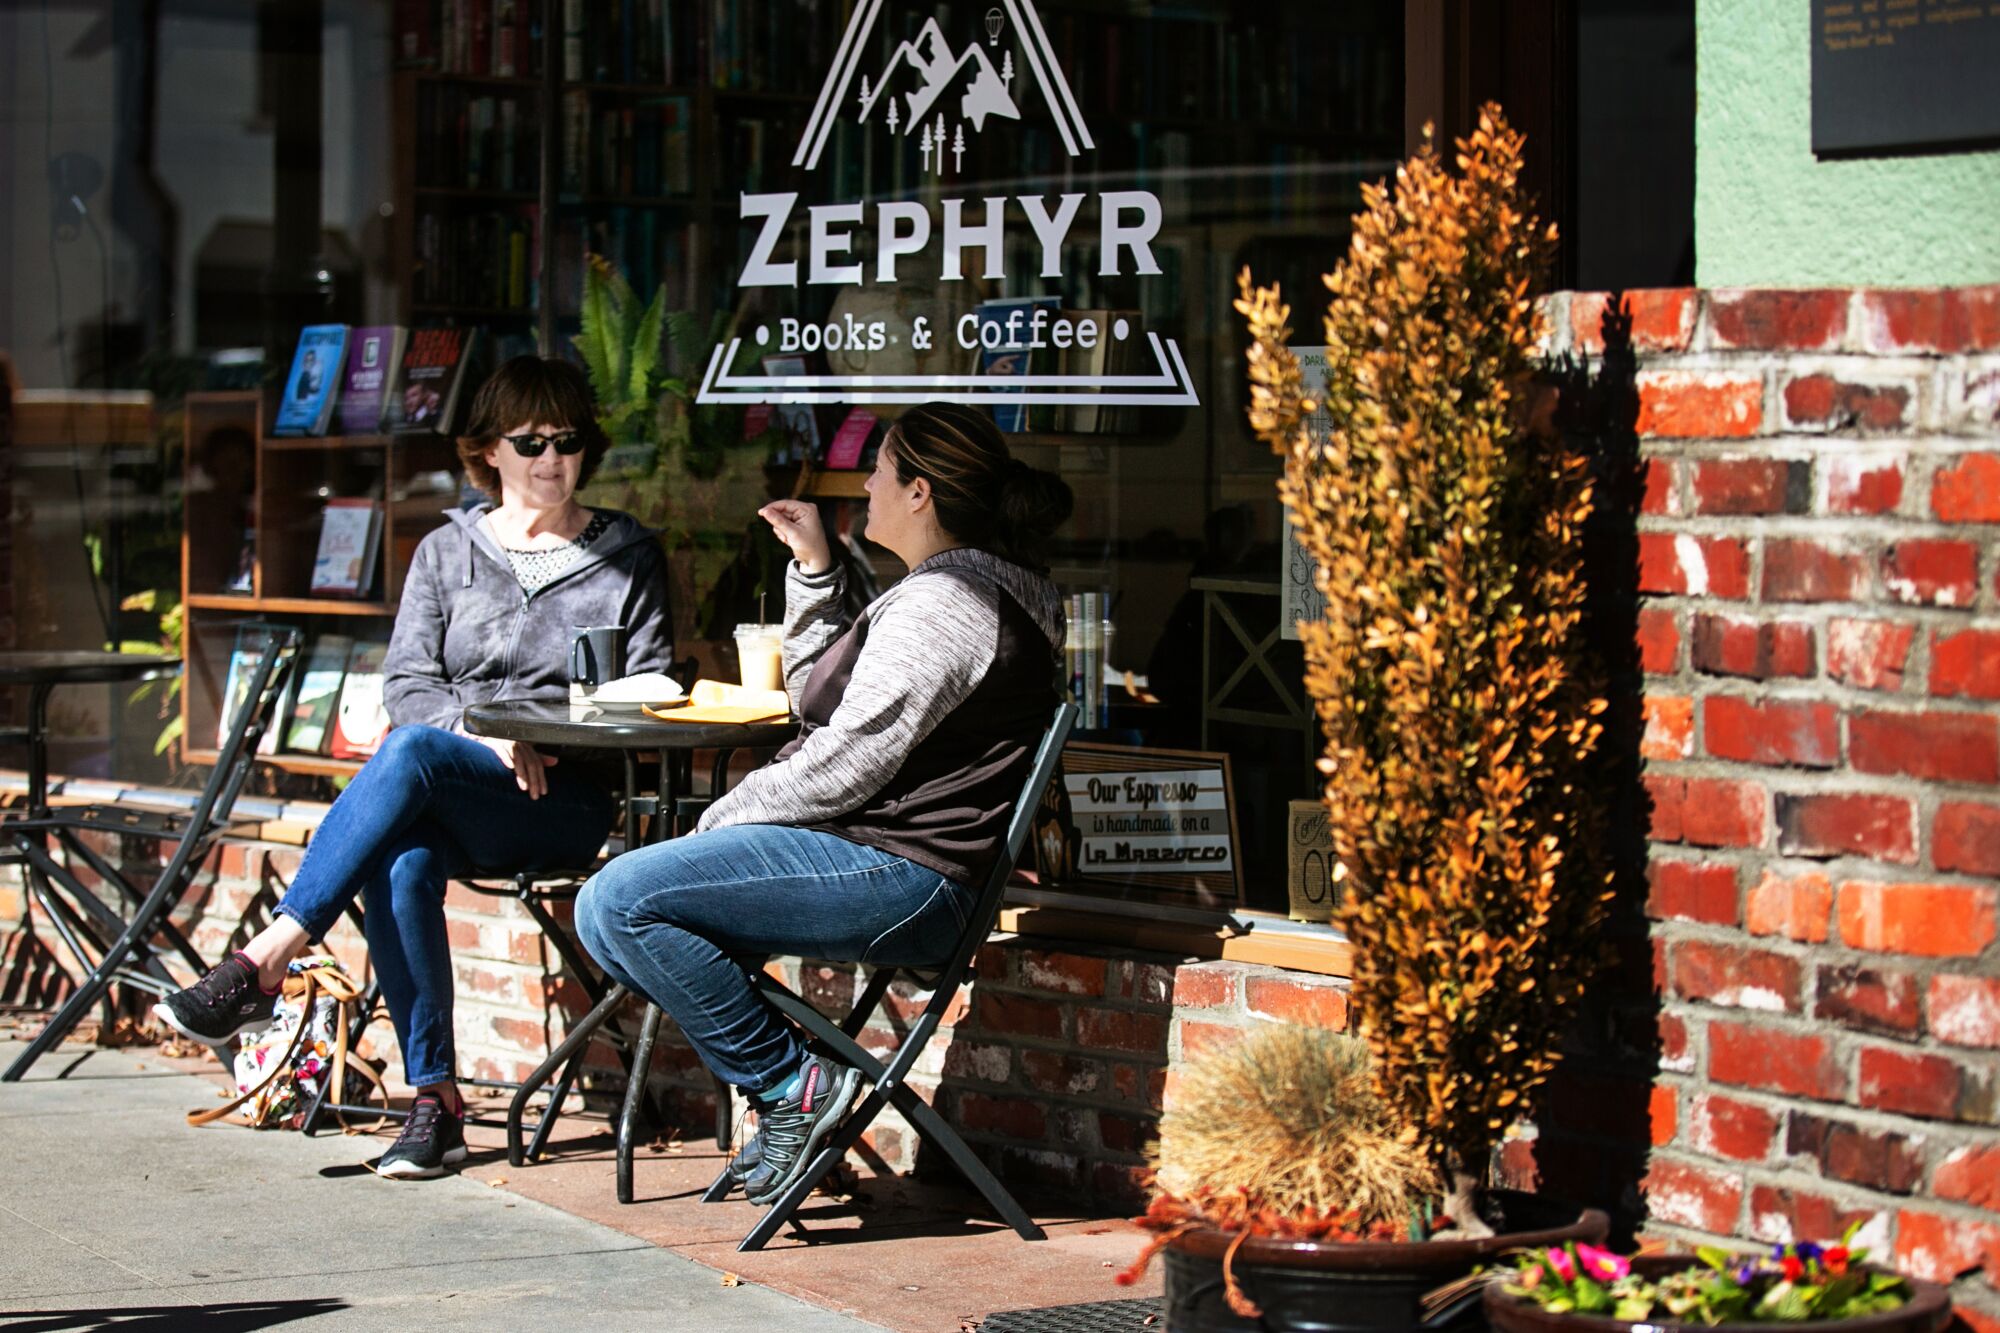 Customers enjoy a coffee at Zephyr Books and Coffee in rural Northern California